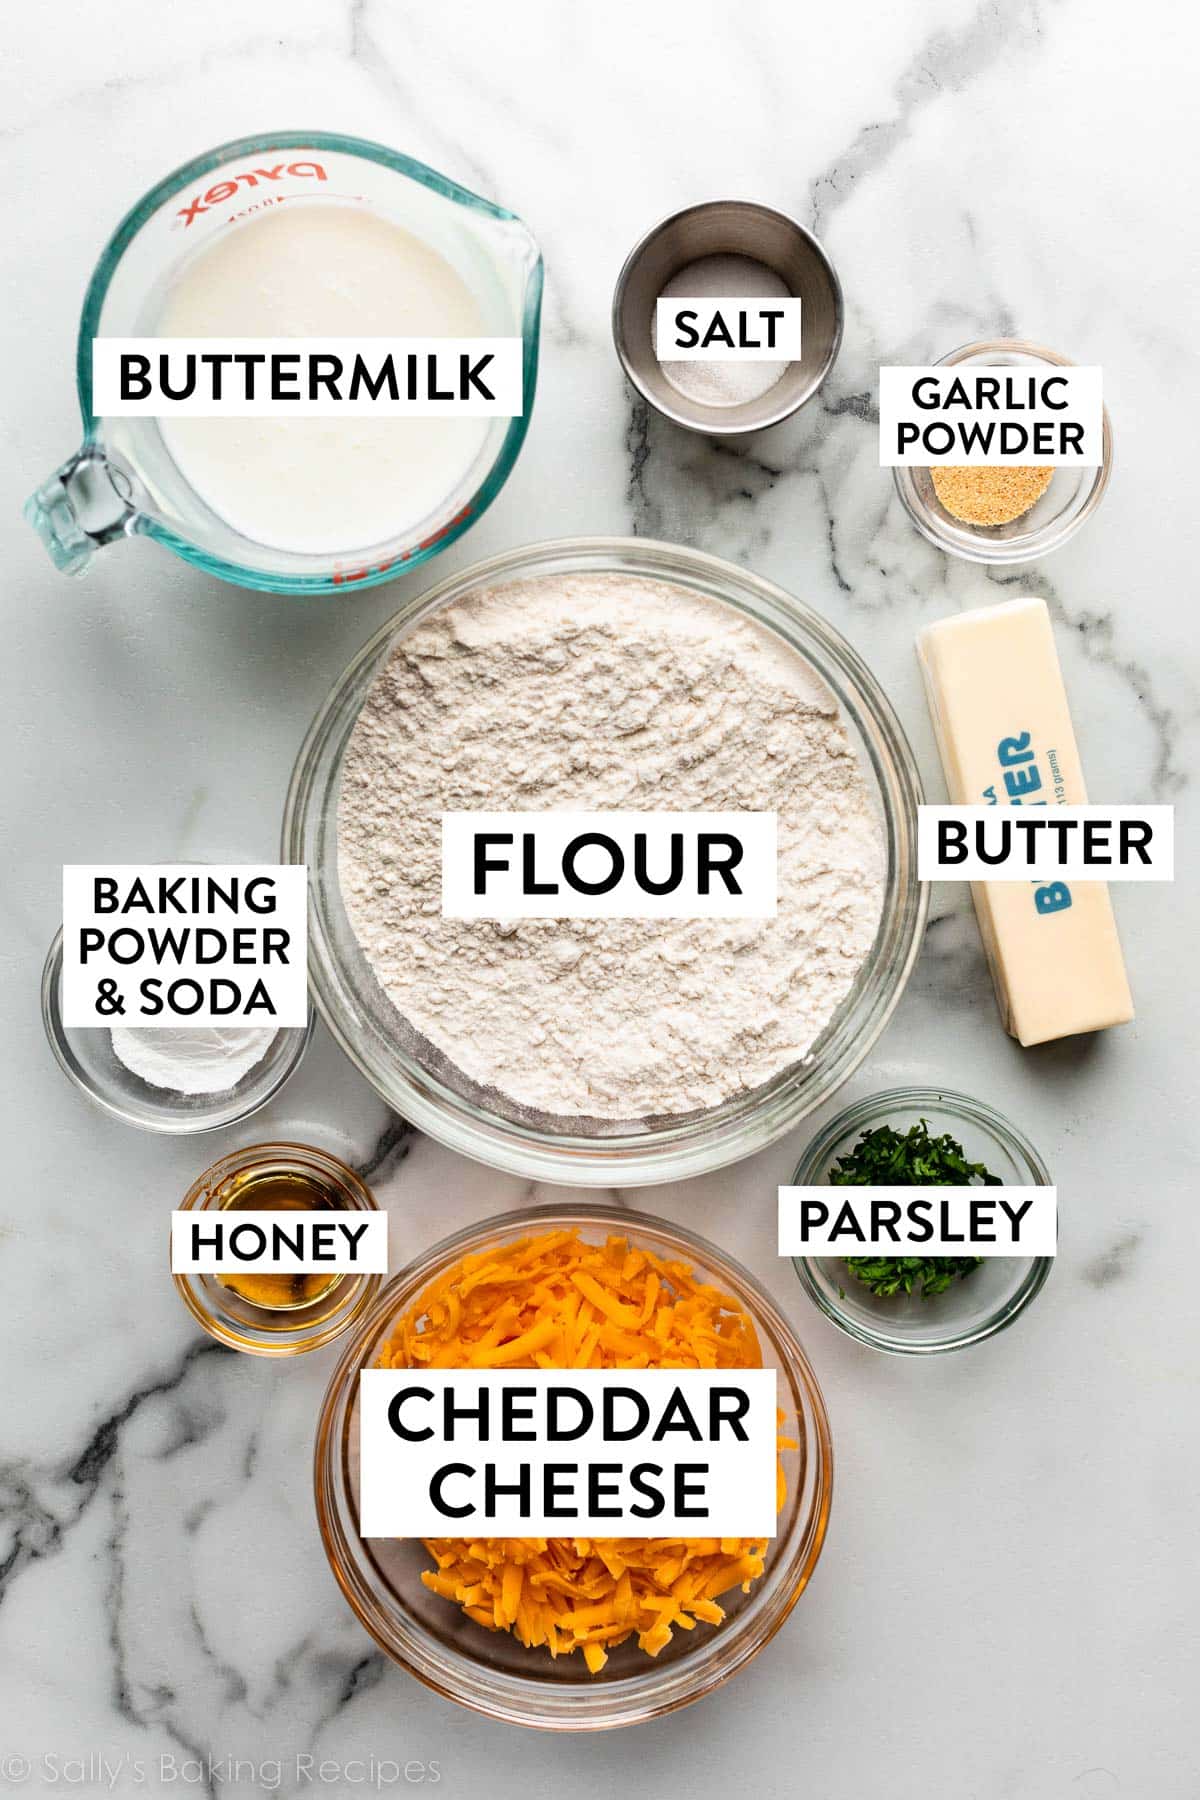 ingredients on marble counter including bowl of flour, cheddar cheese, parsley, garlic powder, salt, a stick of butter, and a measuring cup of milk.